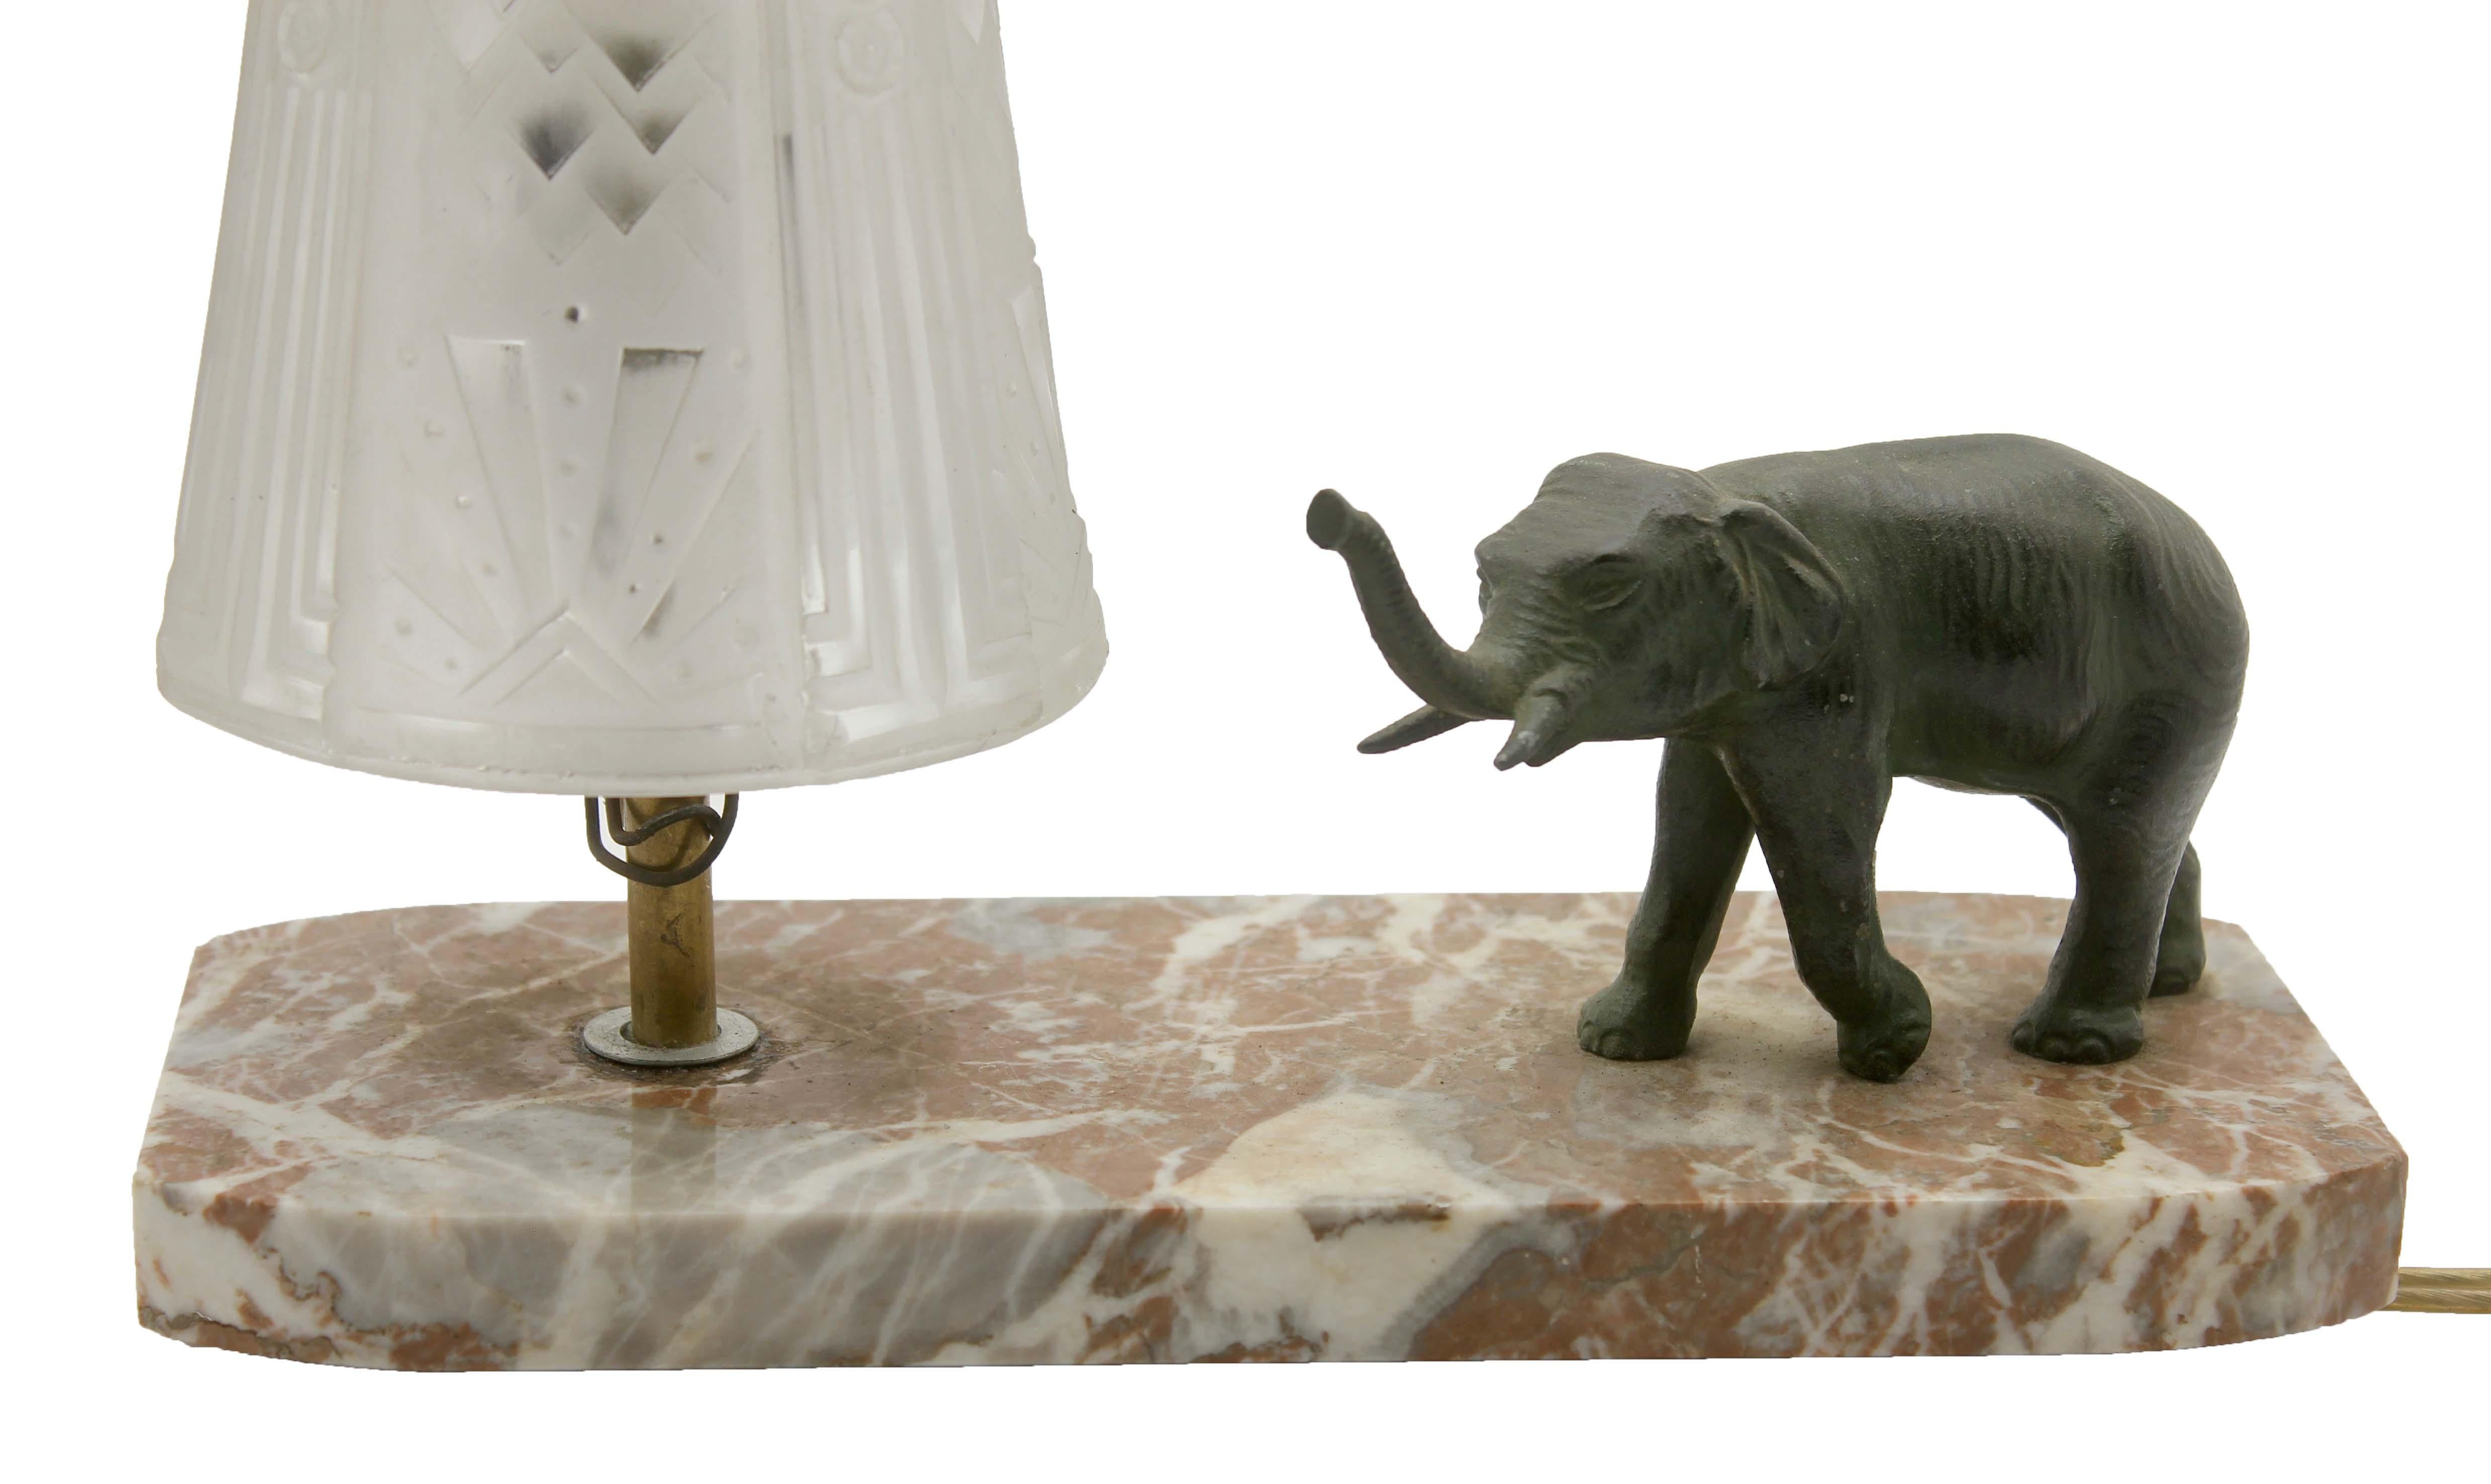 Stunning French Art Deco table lamp signed by Muller Frères. Gorgeous glass globe shade.
With bronze elephant motif. Sitting on a marble base. 
In excellent condition and in full working order. And new fitting E14 

The piece is in excellent and